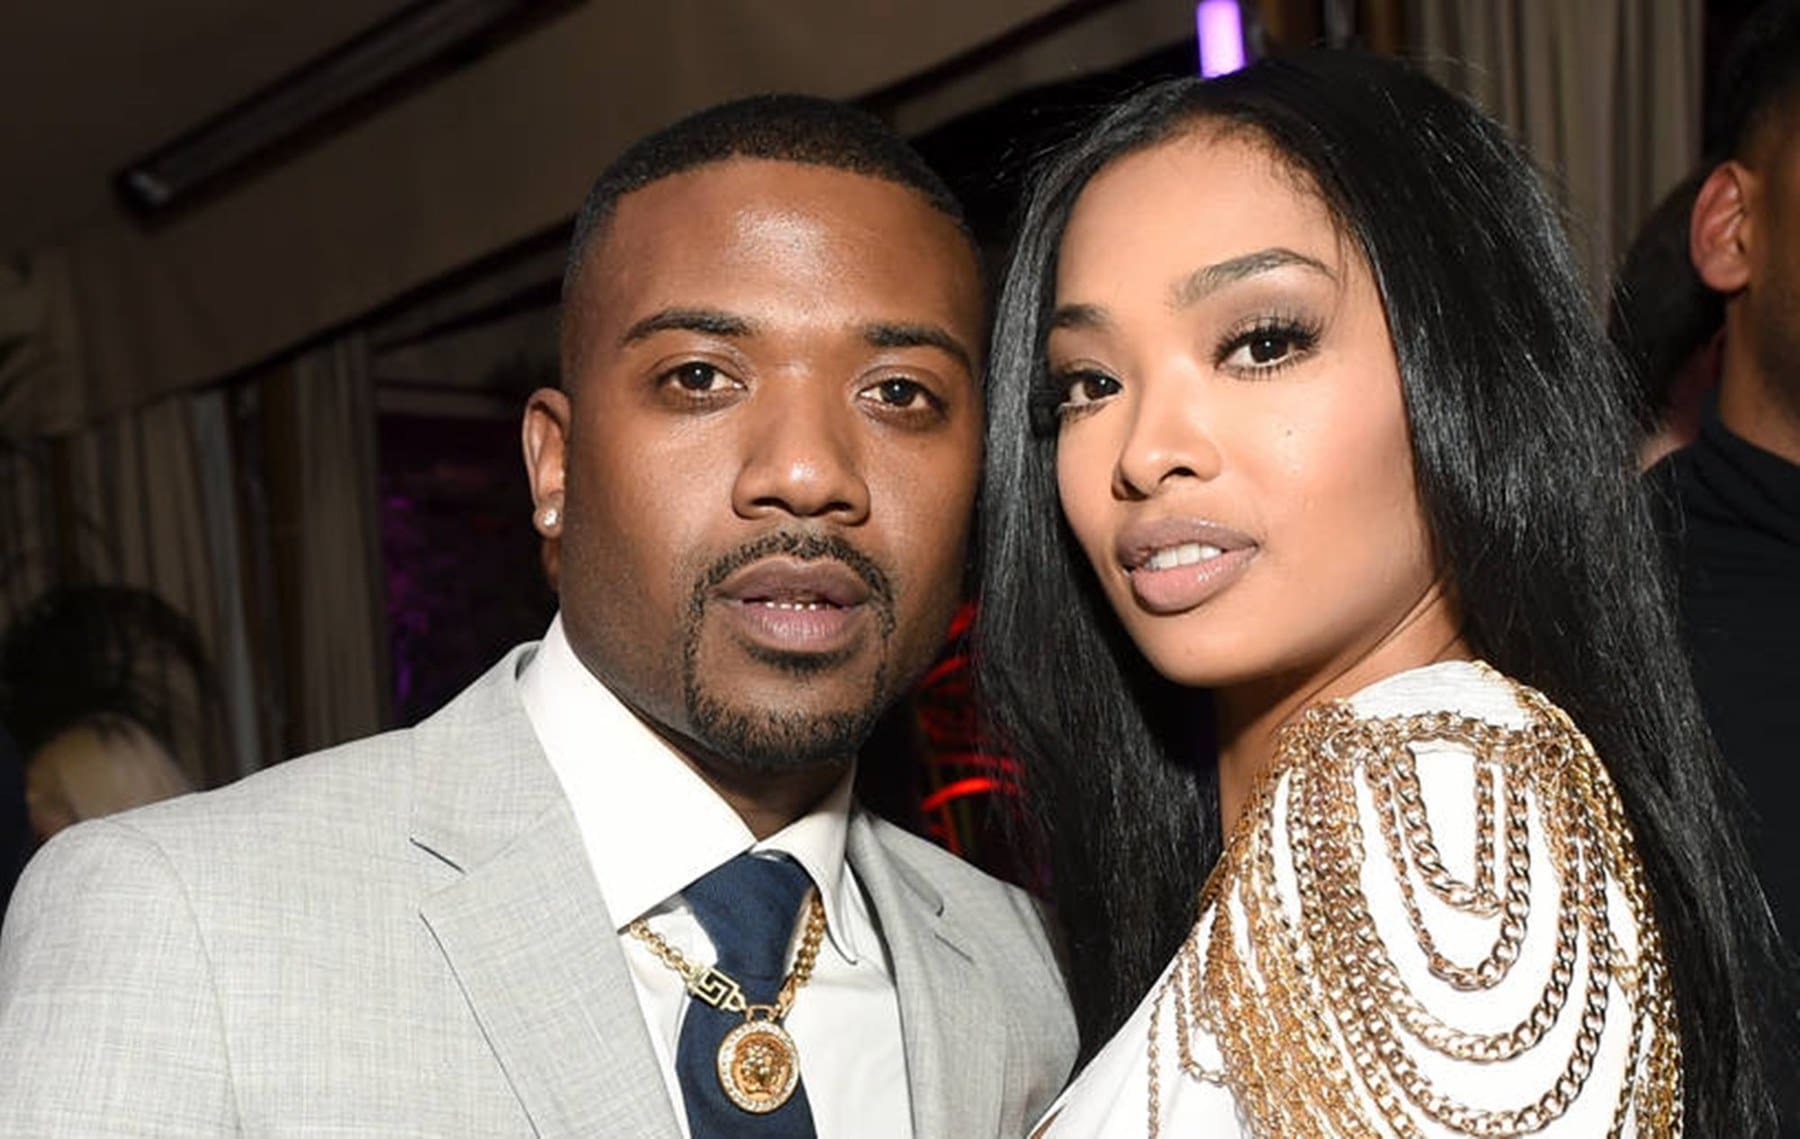 Ray J And Princess Love Are About To Spill Their Relationship Tea On A